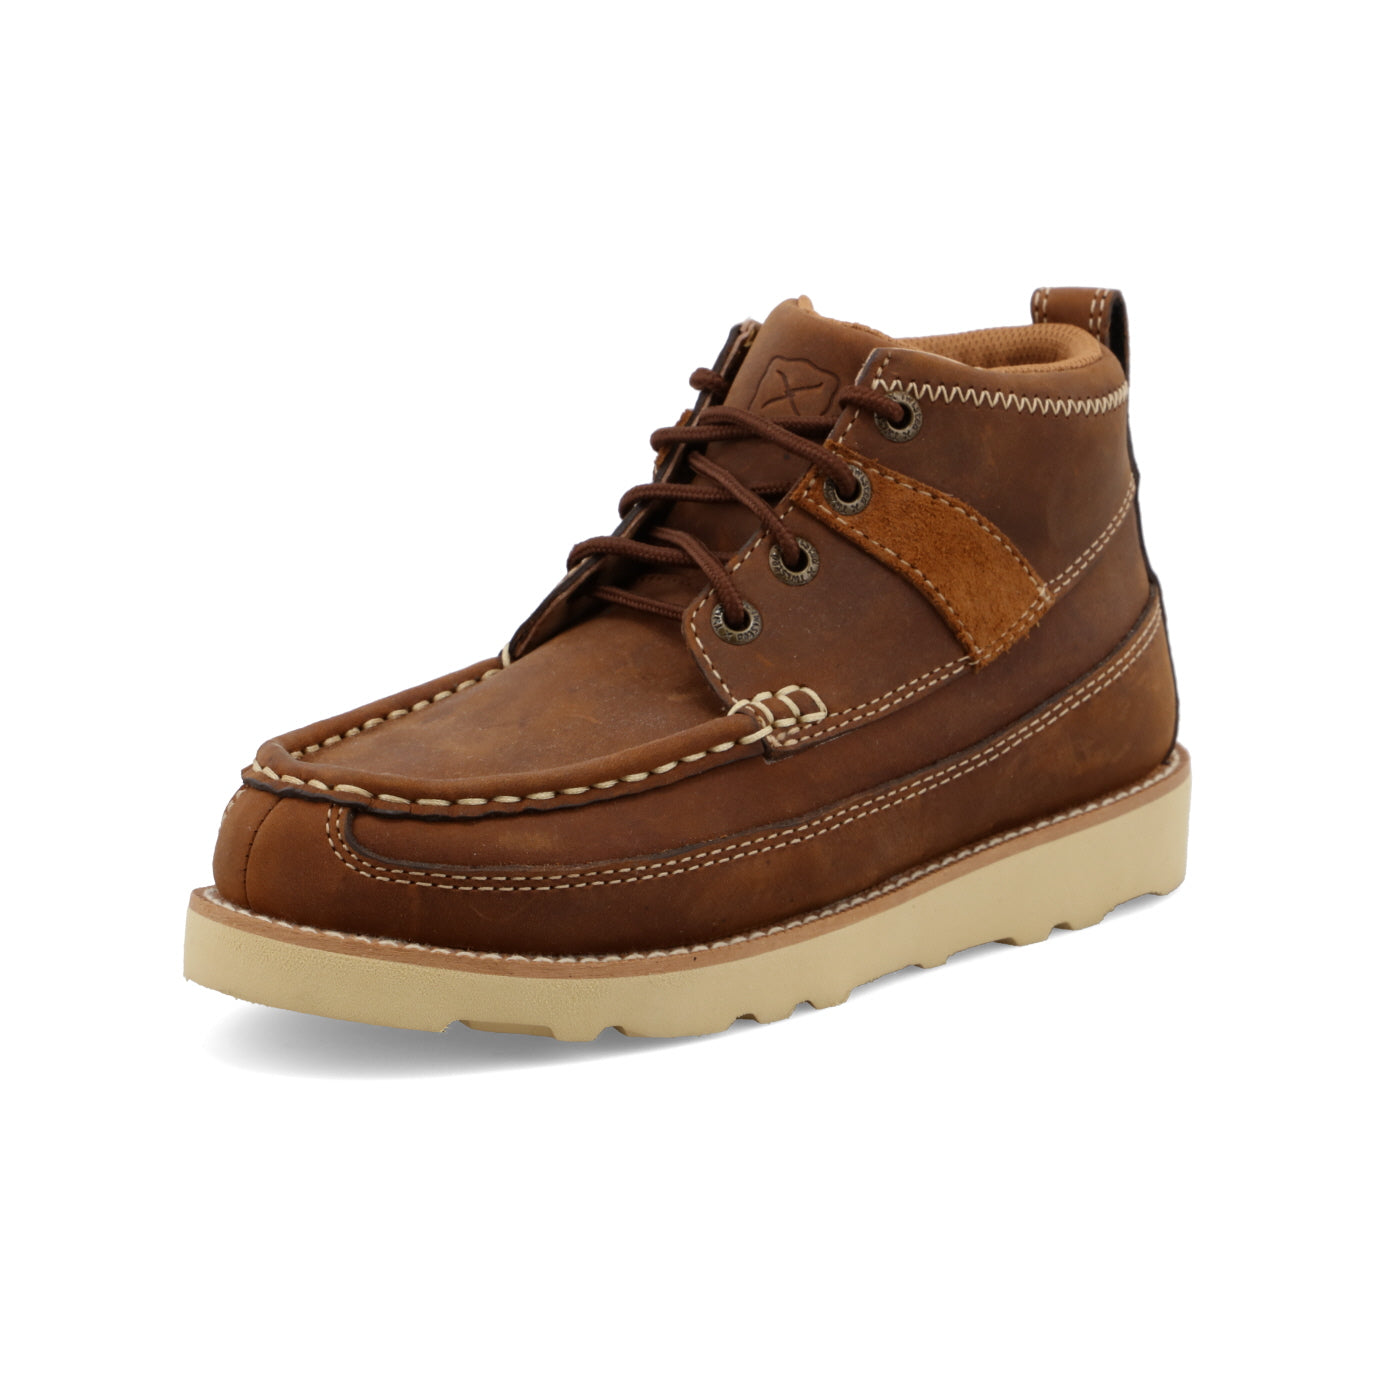 Twisted X Youth Wedge Sole Boot - Oiled Saddle STYLE YCA0001